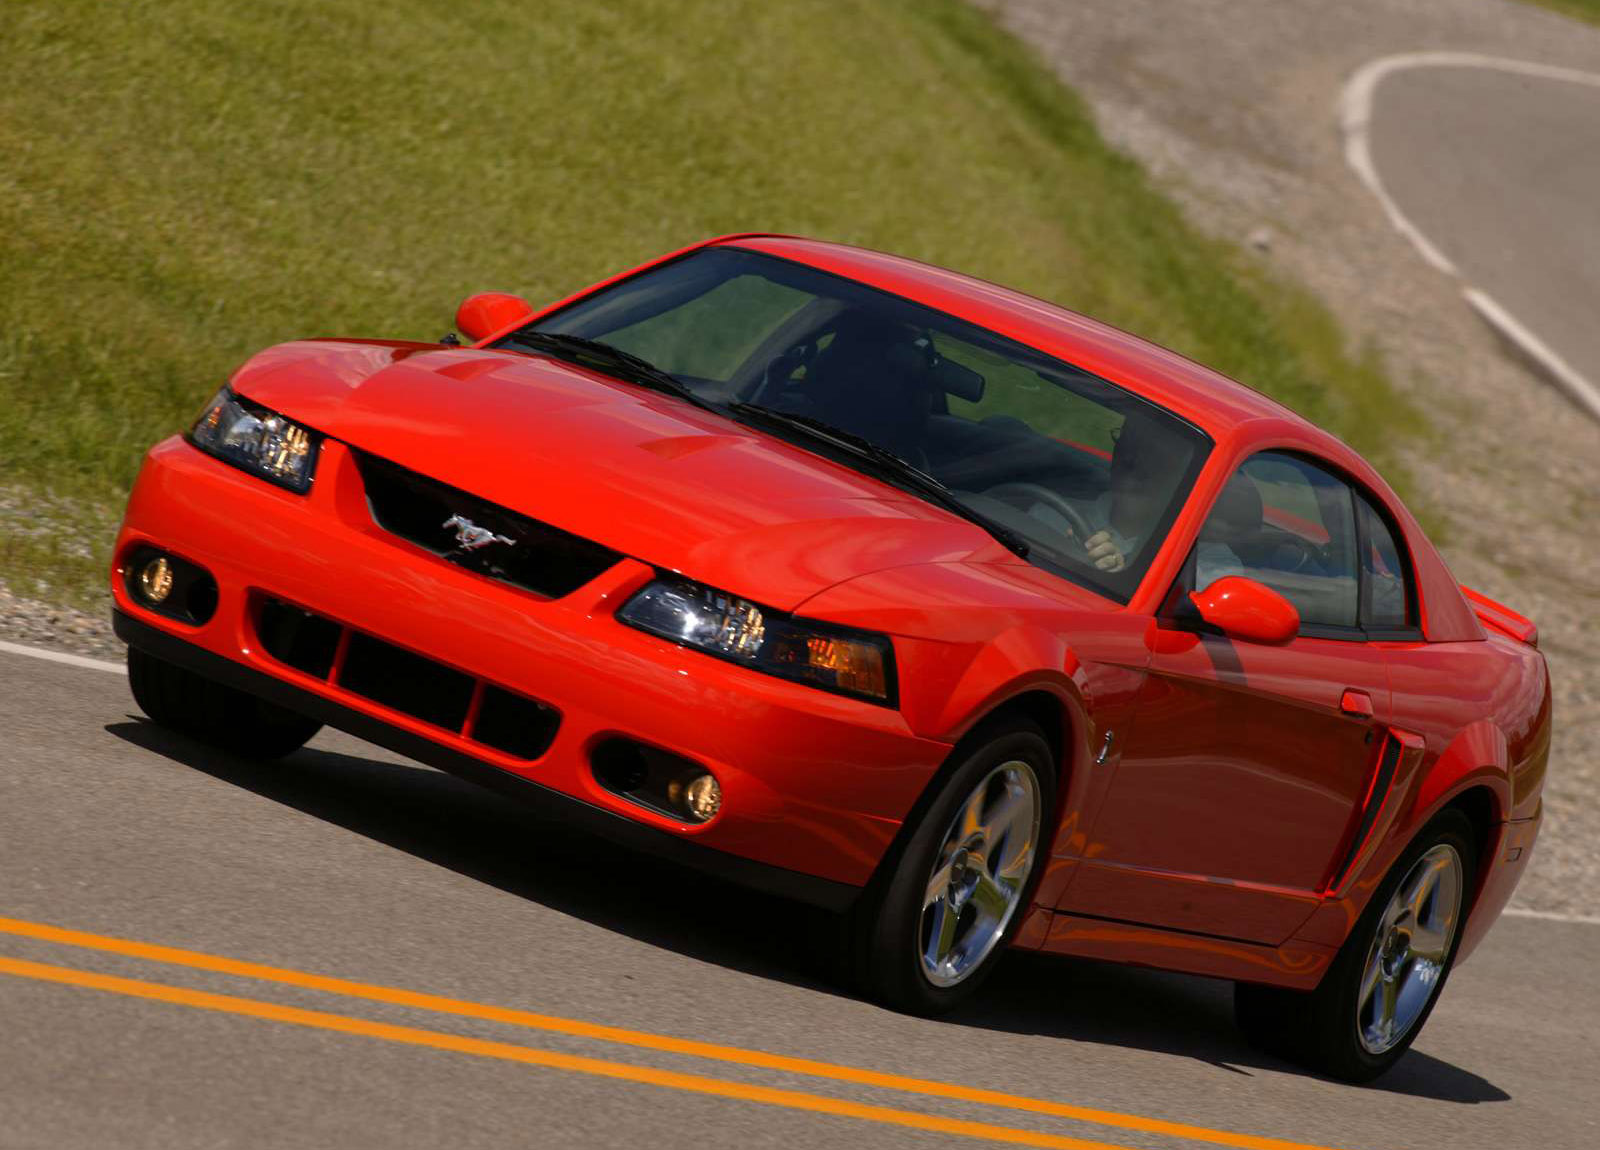 2004 Ford Mustang SVT Cobra - HD Pictures @ carsinvasion.com